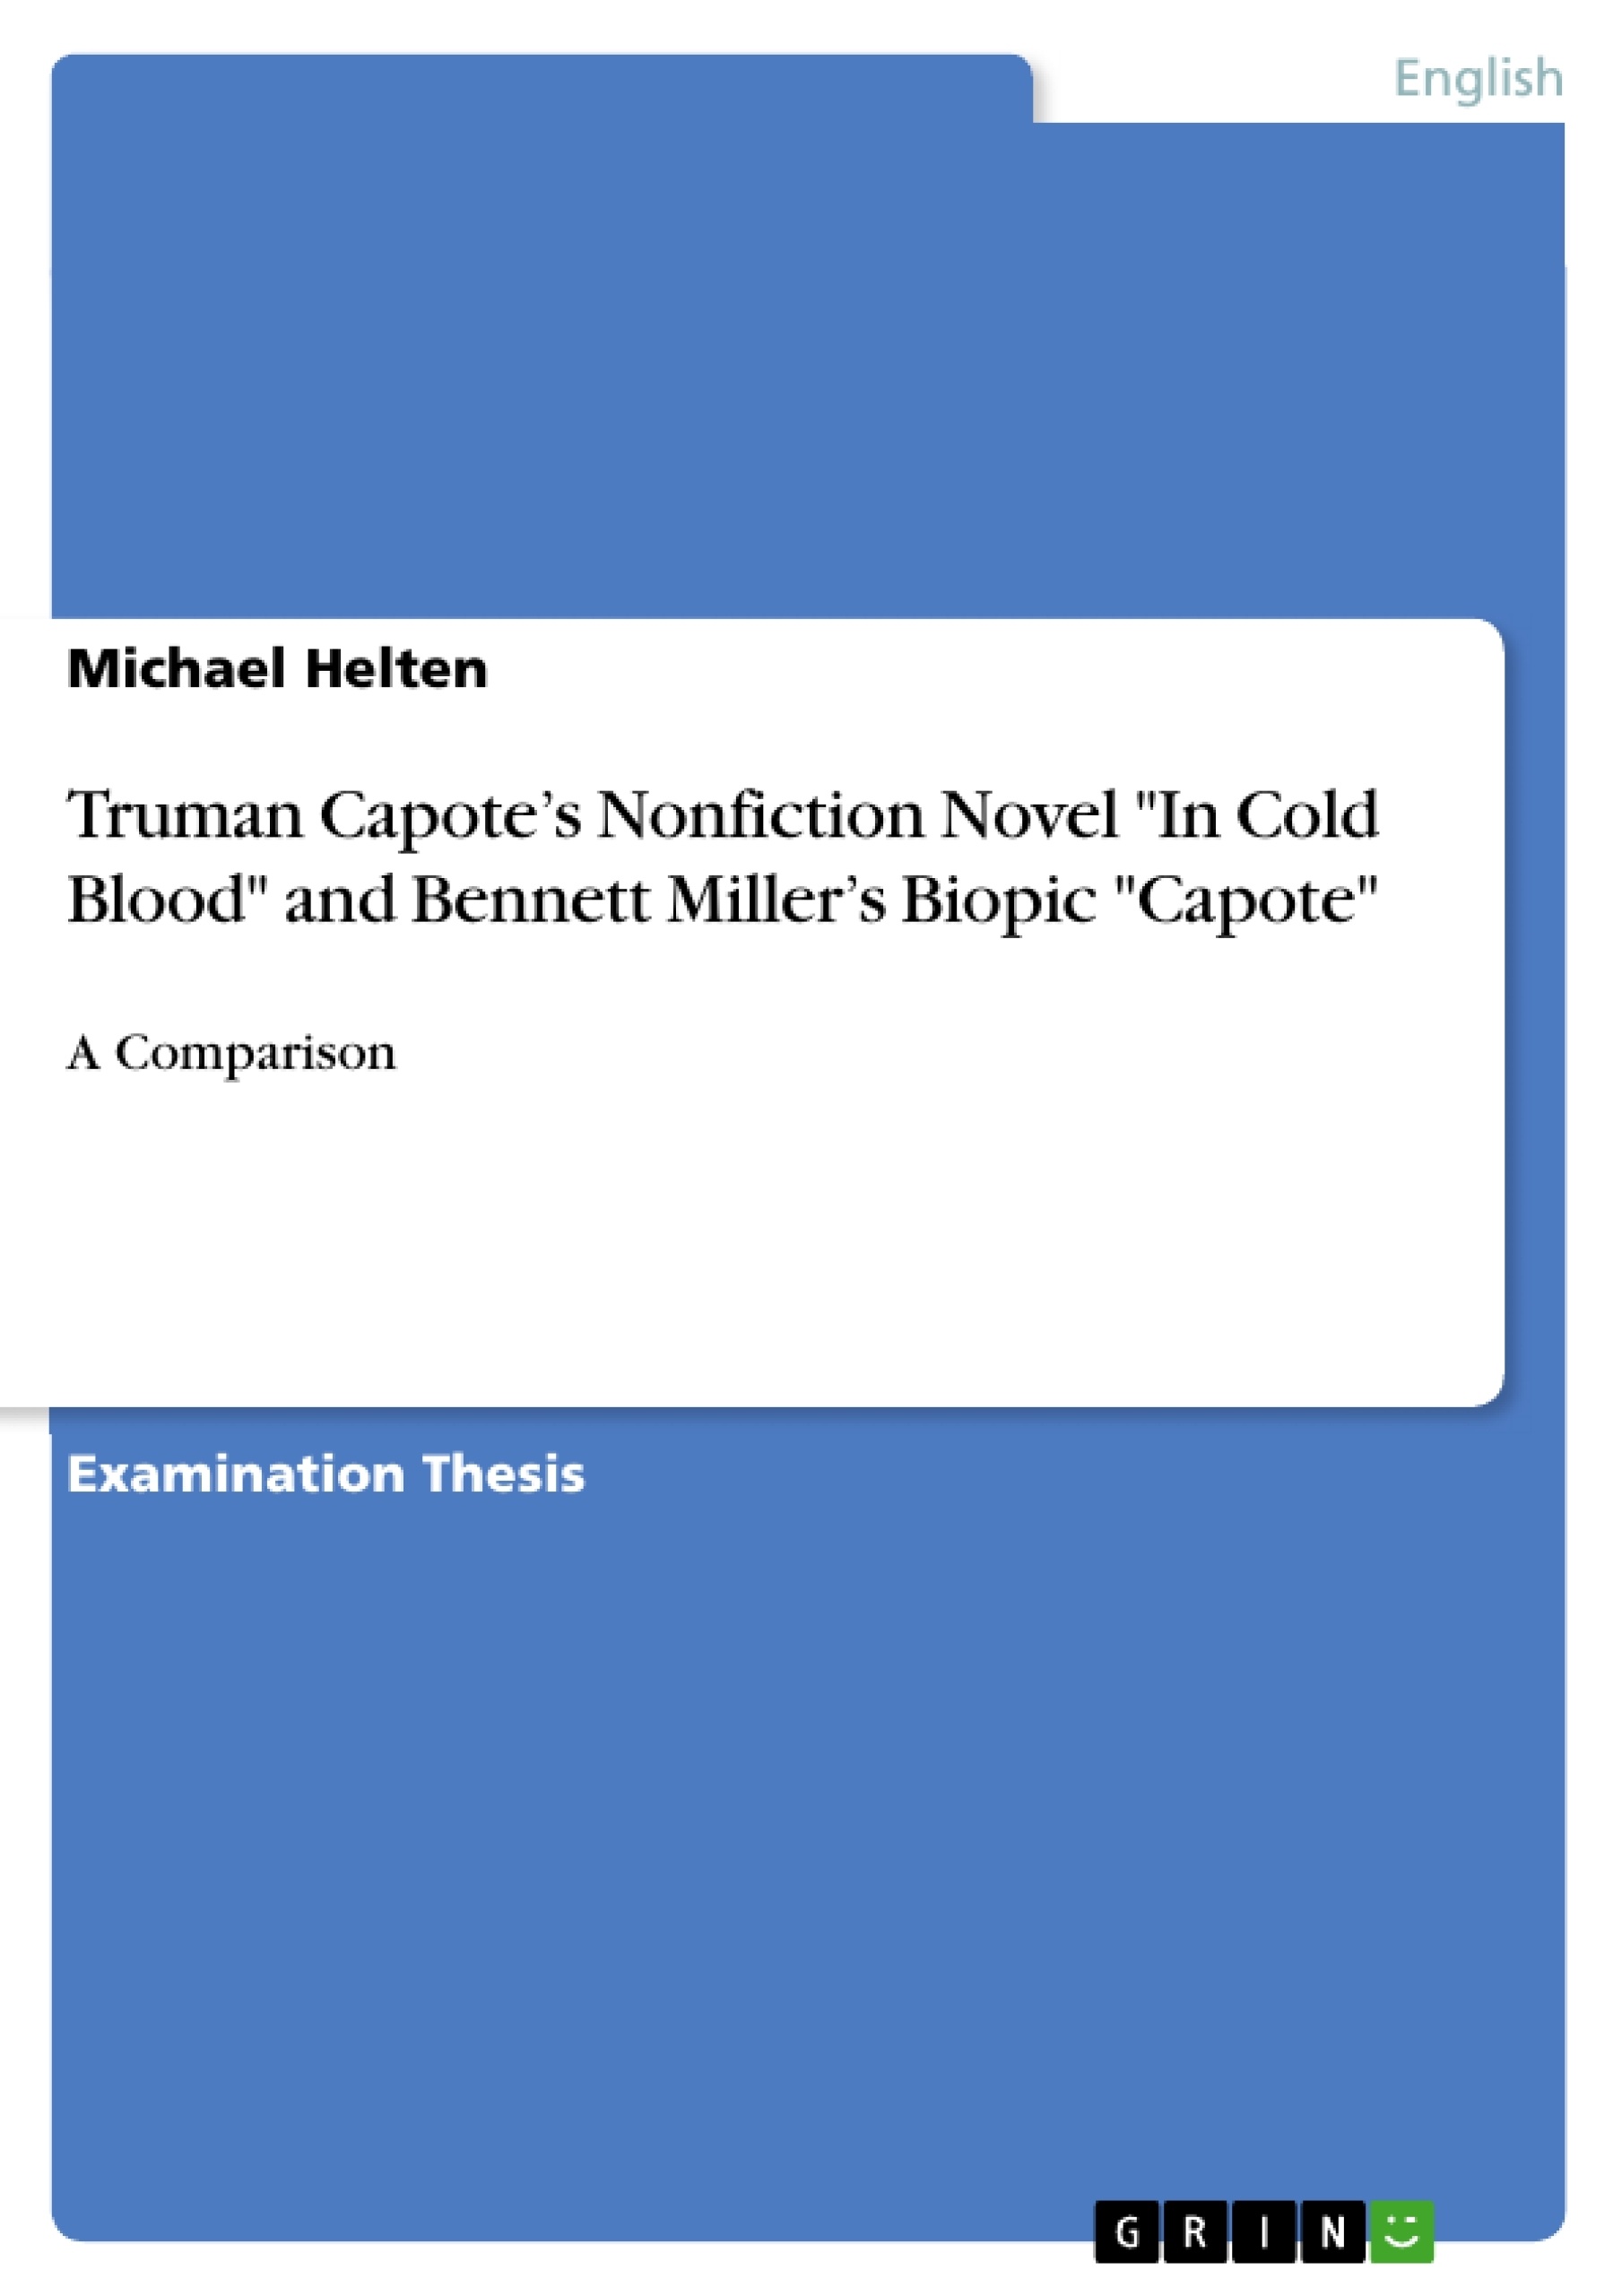 Title: Truman Capote’s Nonfiction Novel "In Cold Blood" and Bennett Miller’s Biopic "Capote"